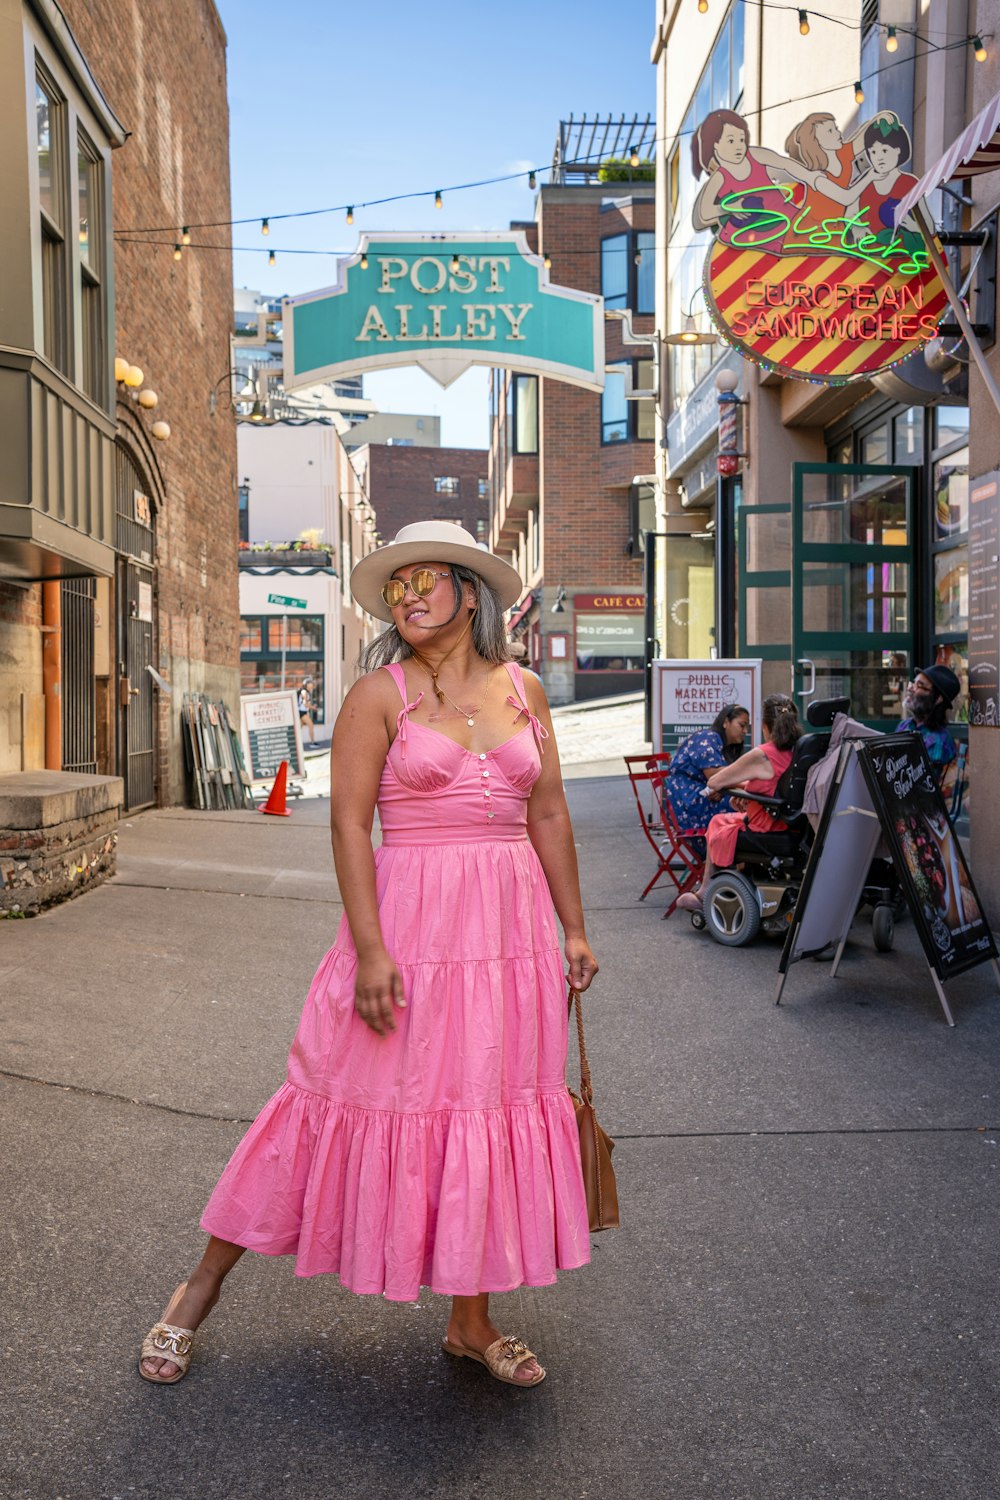 a woman in a pink dress and hat walking down a street